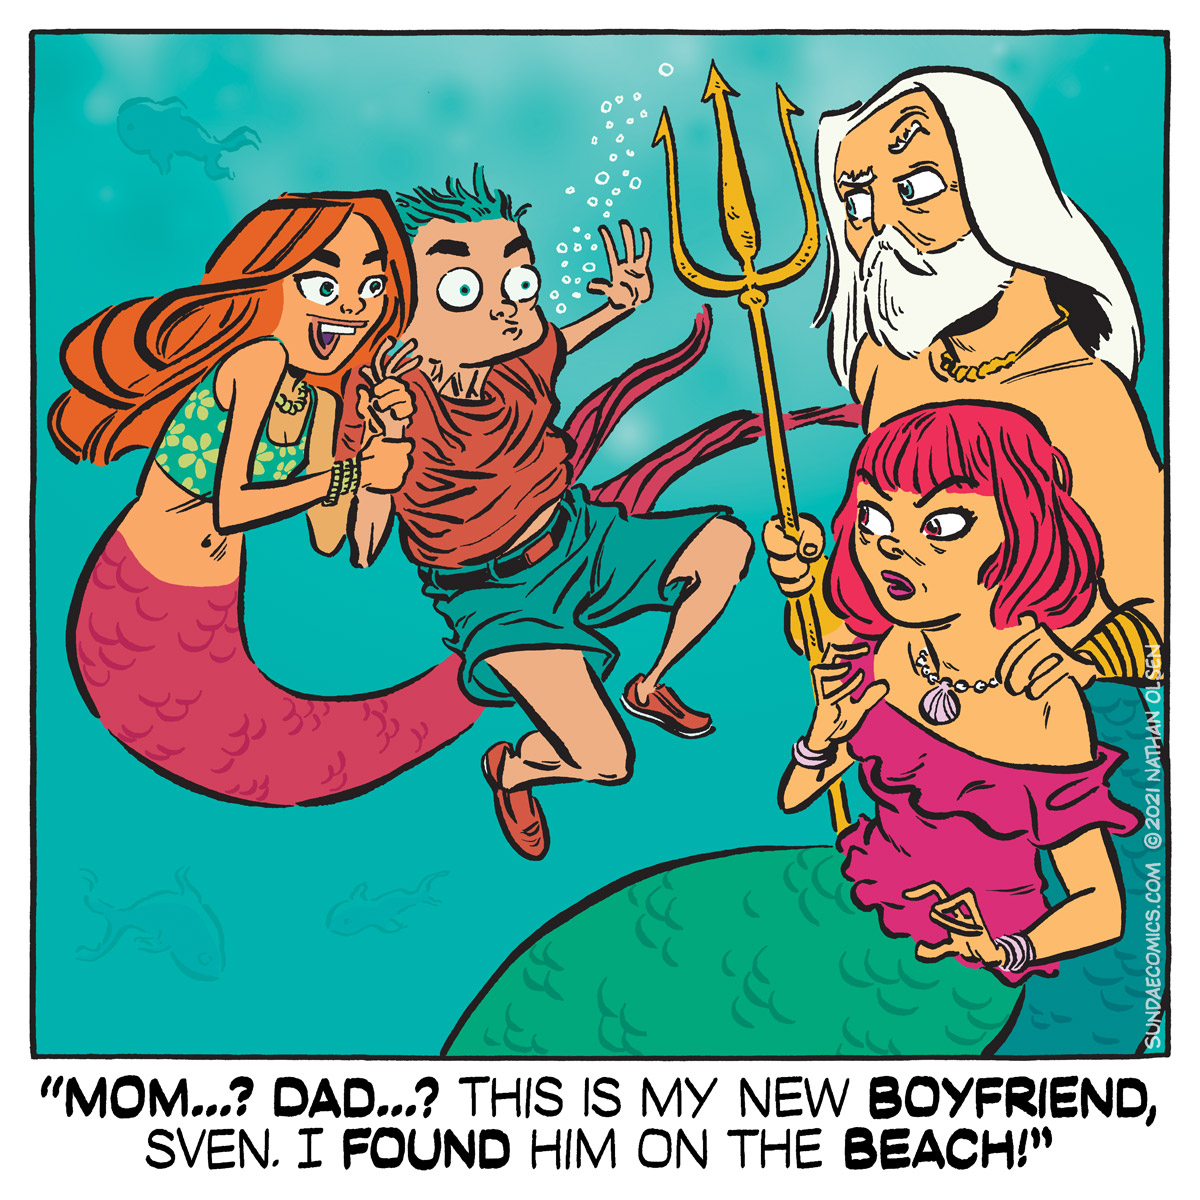 A funny comicstrip about a mermaid who introduces her new boyfriend to the family.